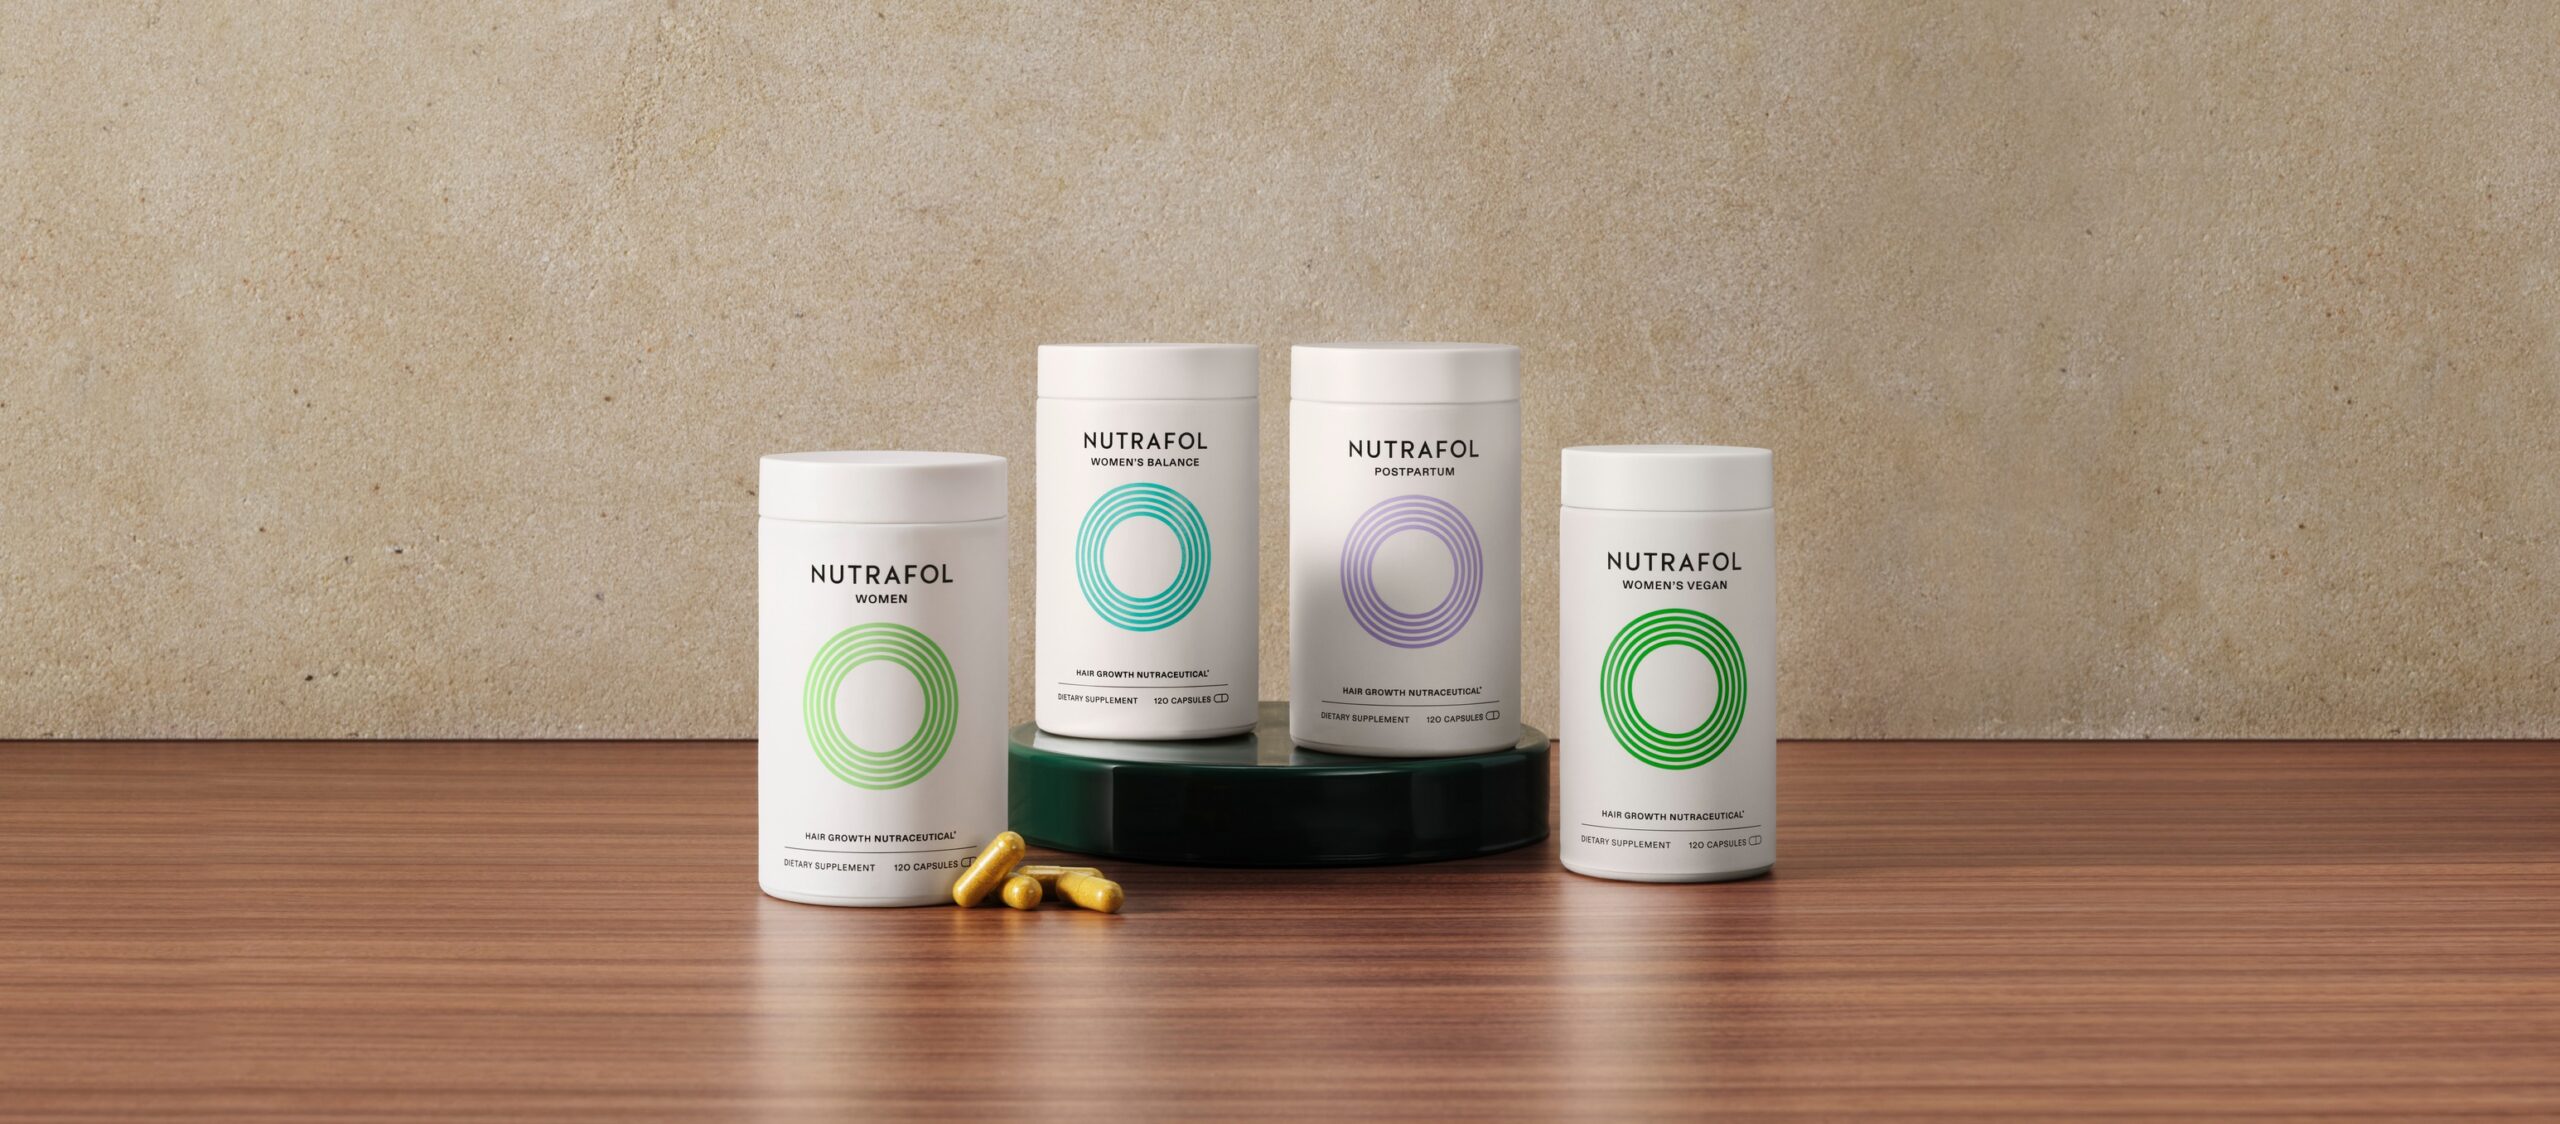 Nutrafol review